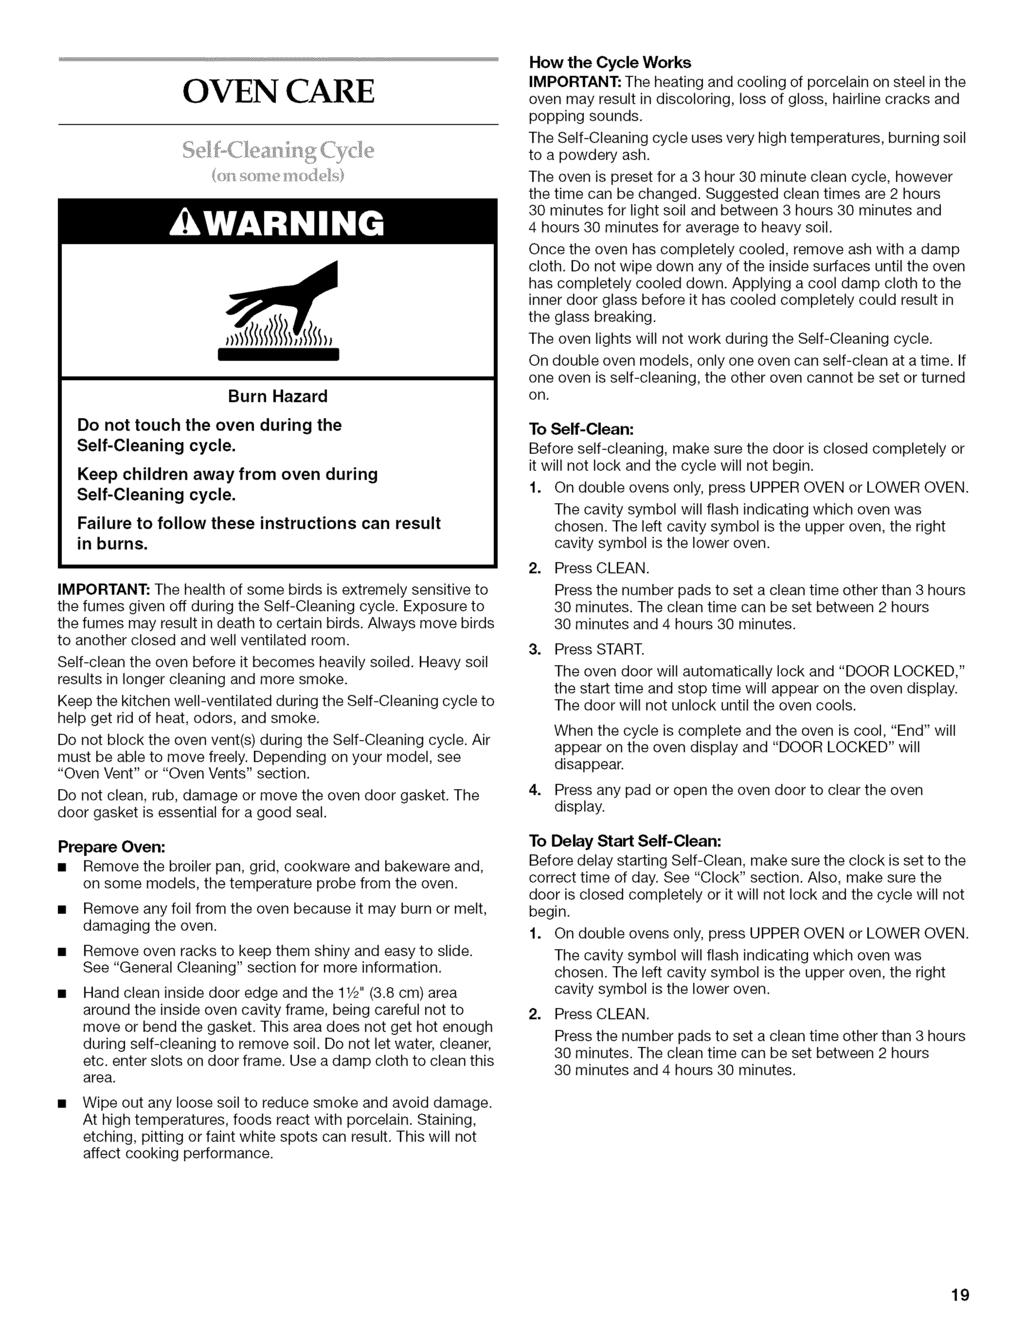 OVEN CARE Burn Hazard Do not touch the oven during the Self-Cleaning cycle. Keep children away from oven during Self-Cleaning cycle. Failure to follow these instructions can result in burns.